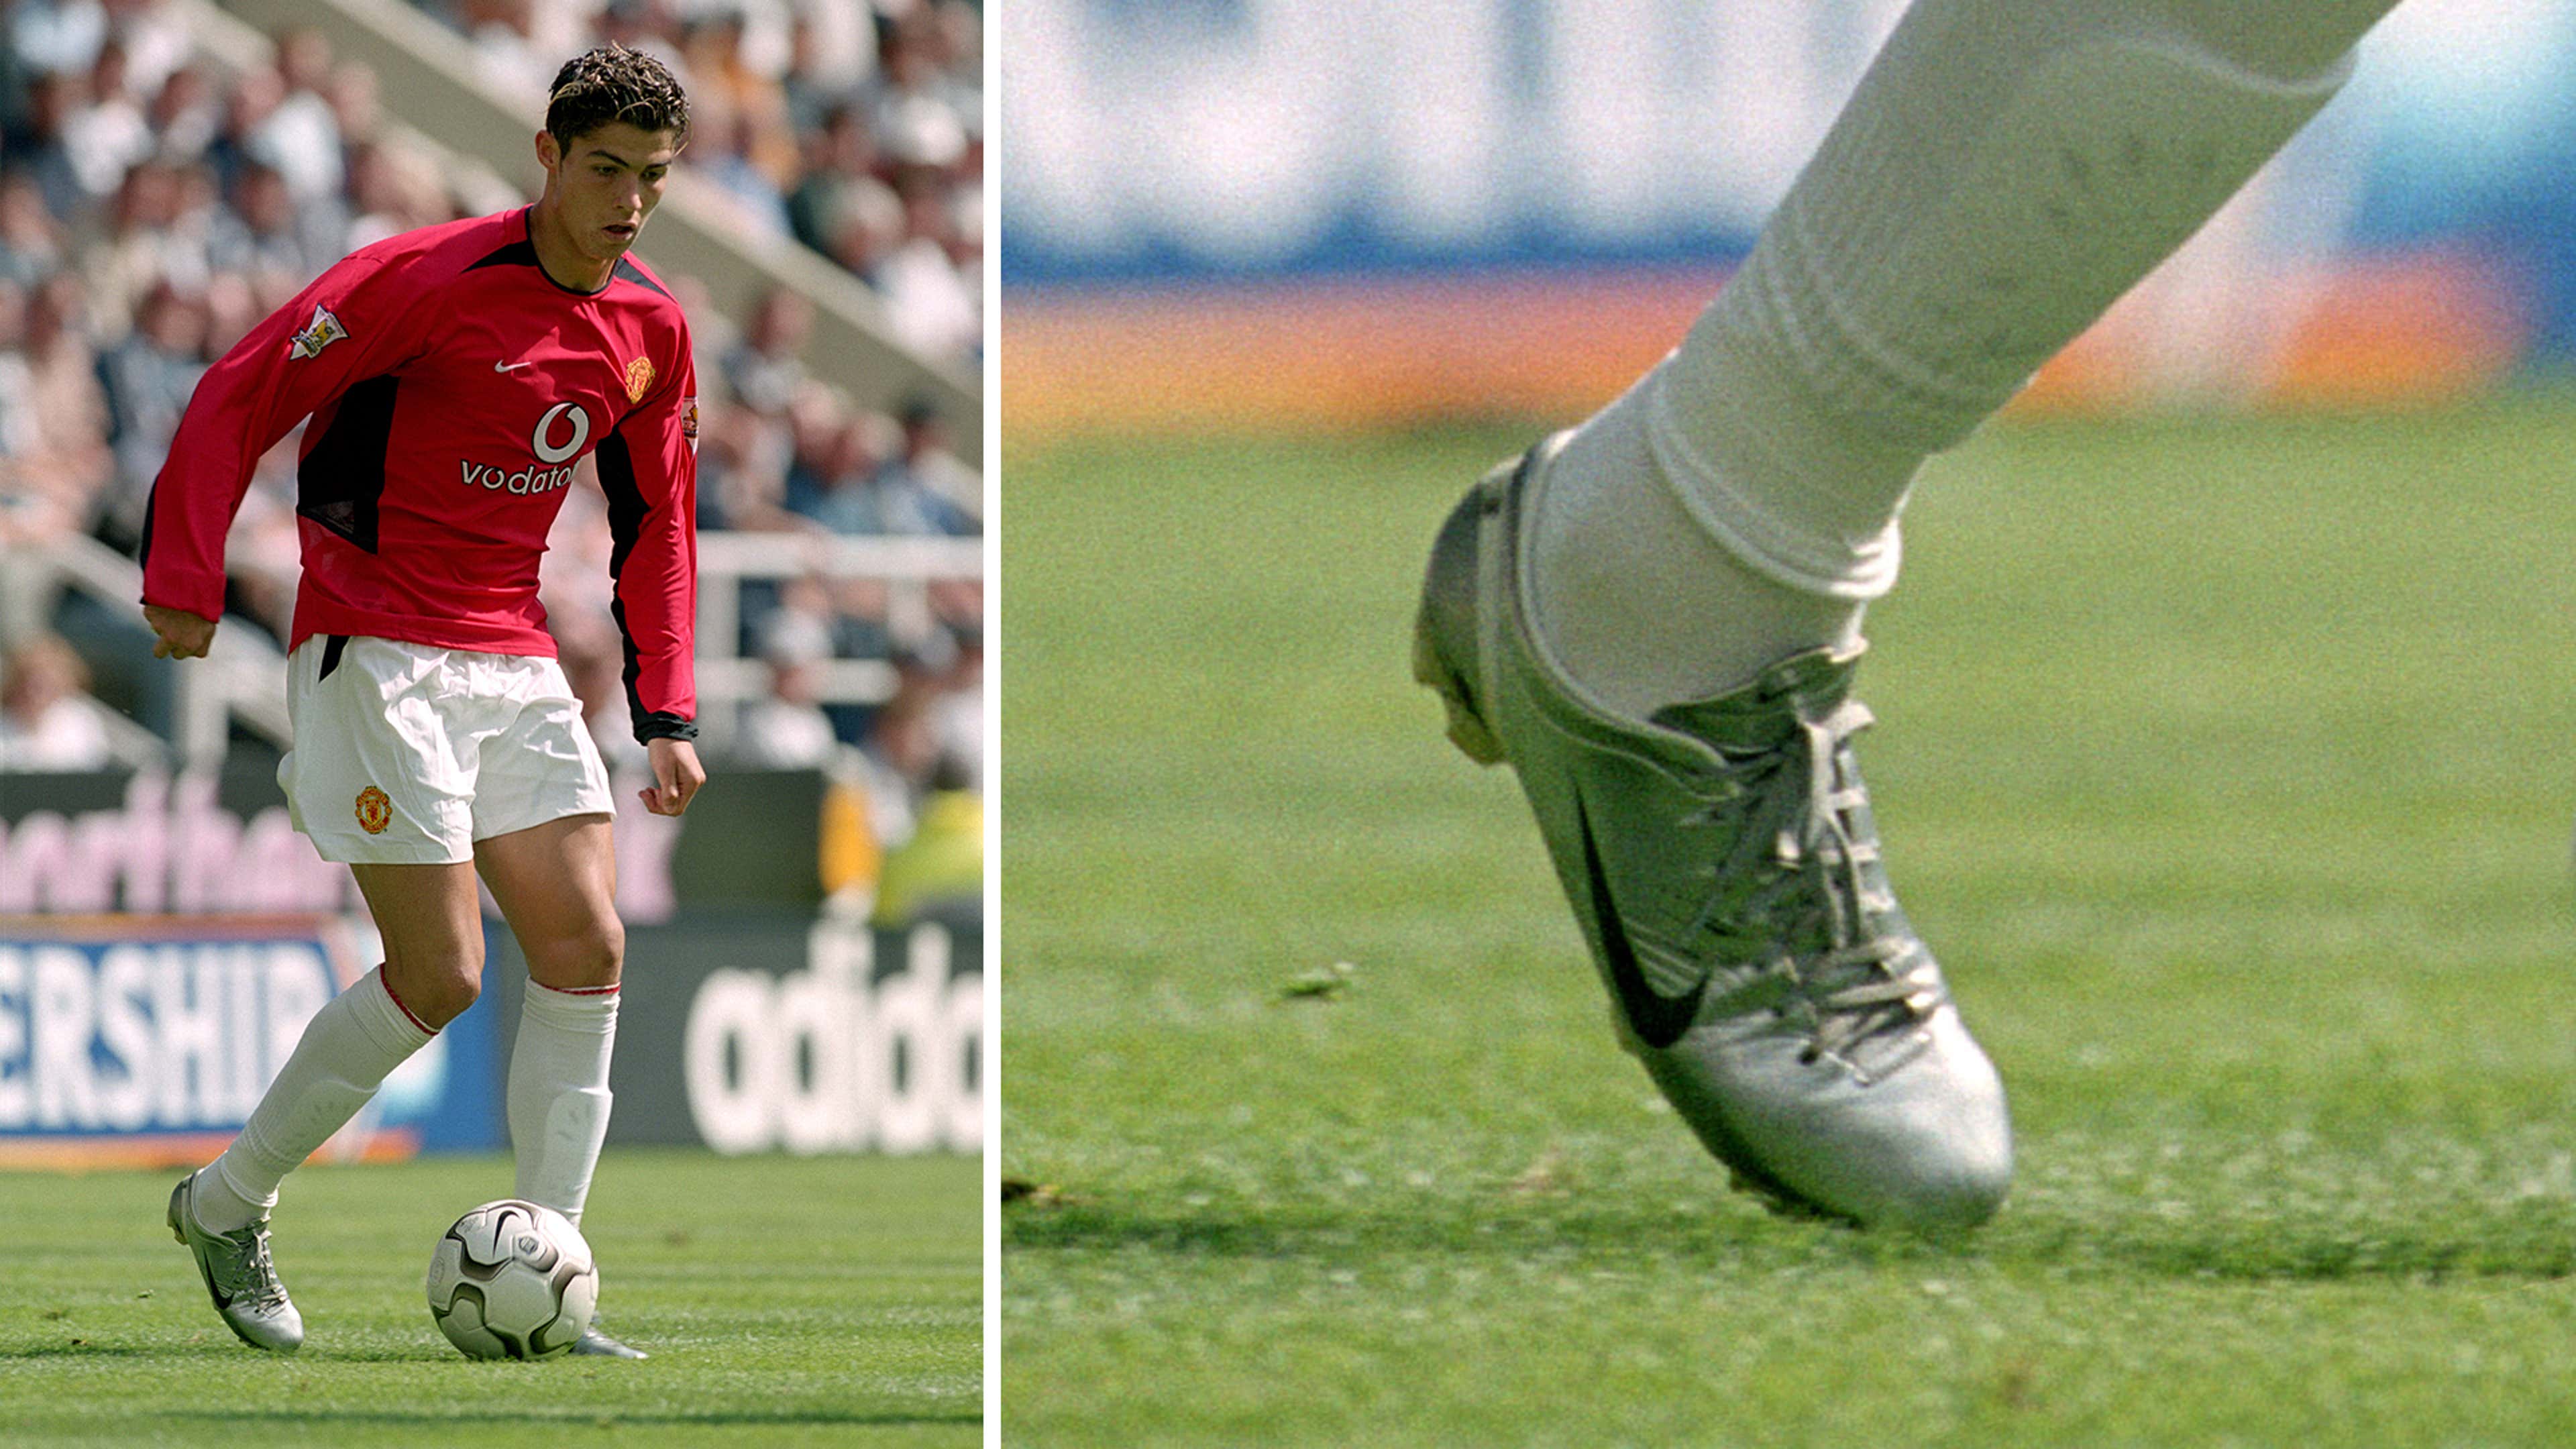 TCR. on X: Cristiano Ronaldo's new Mercurial Sulerfly 360 boots